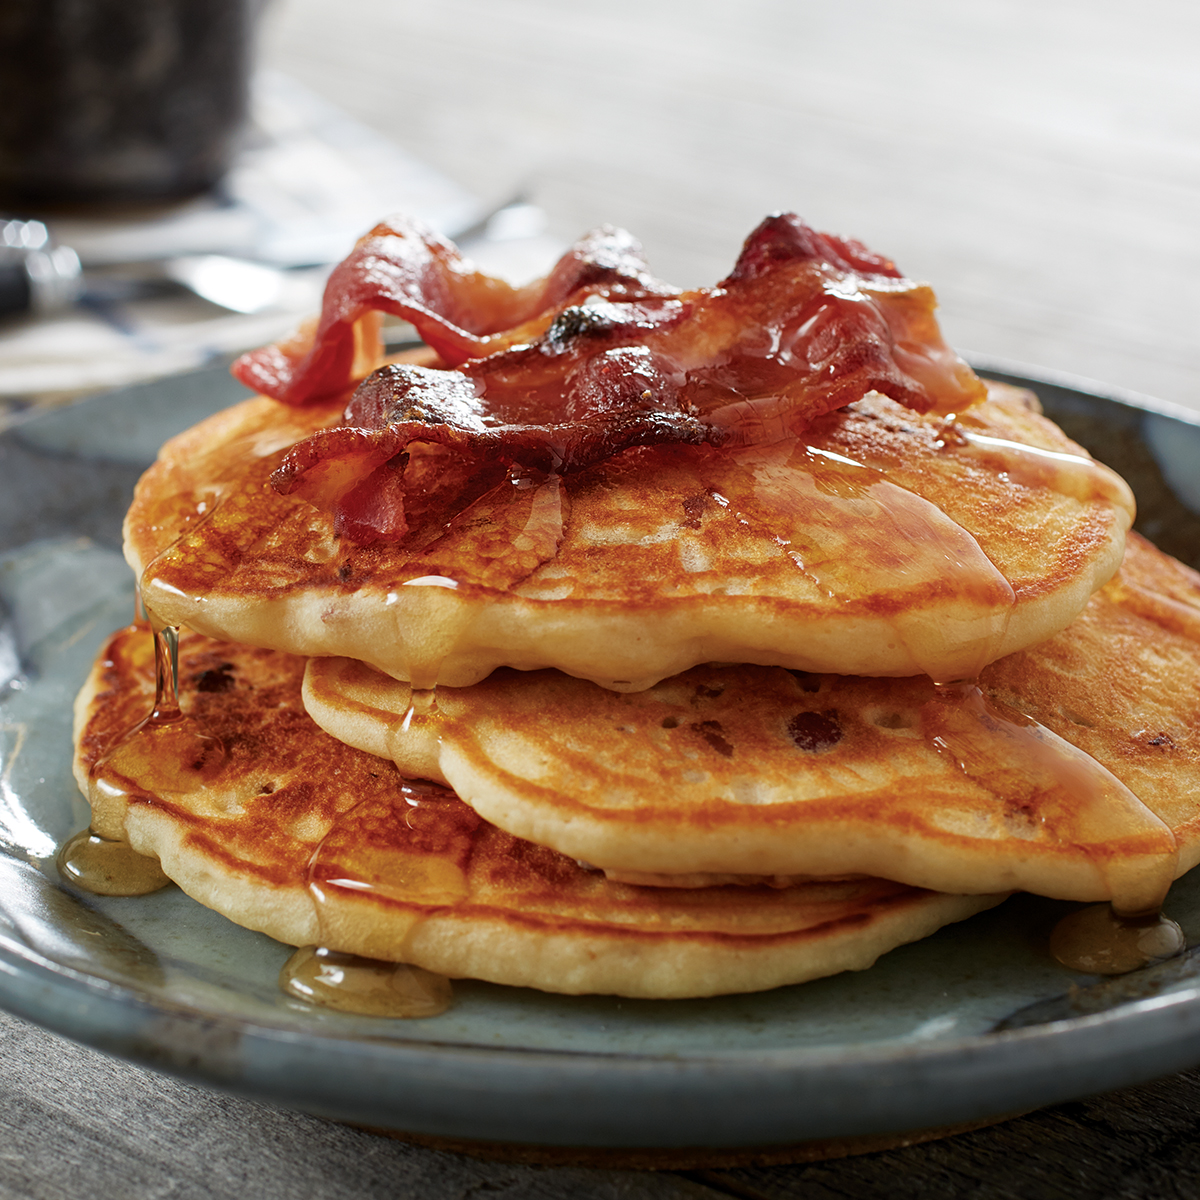 Candied Bacon Pancakes with Cinnamon Brown Sugar Syrup